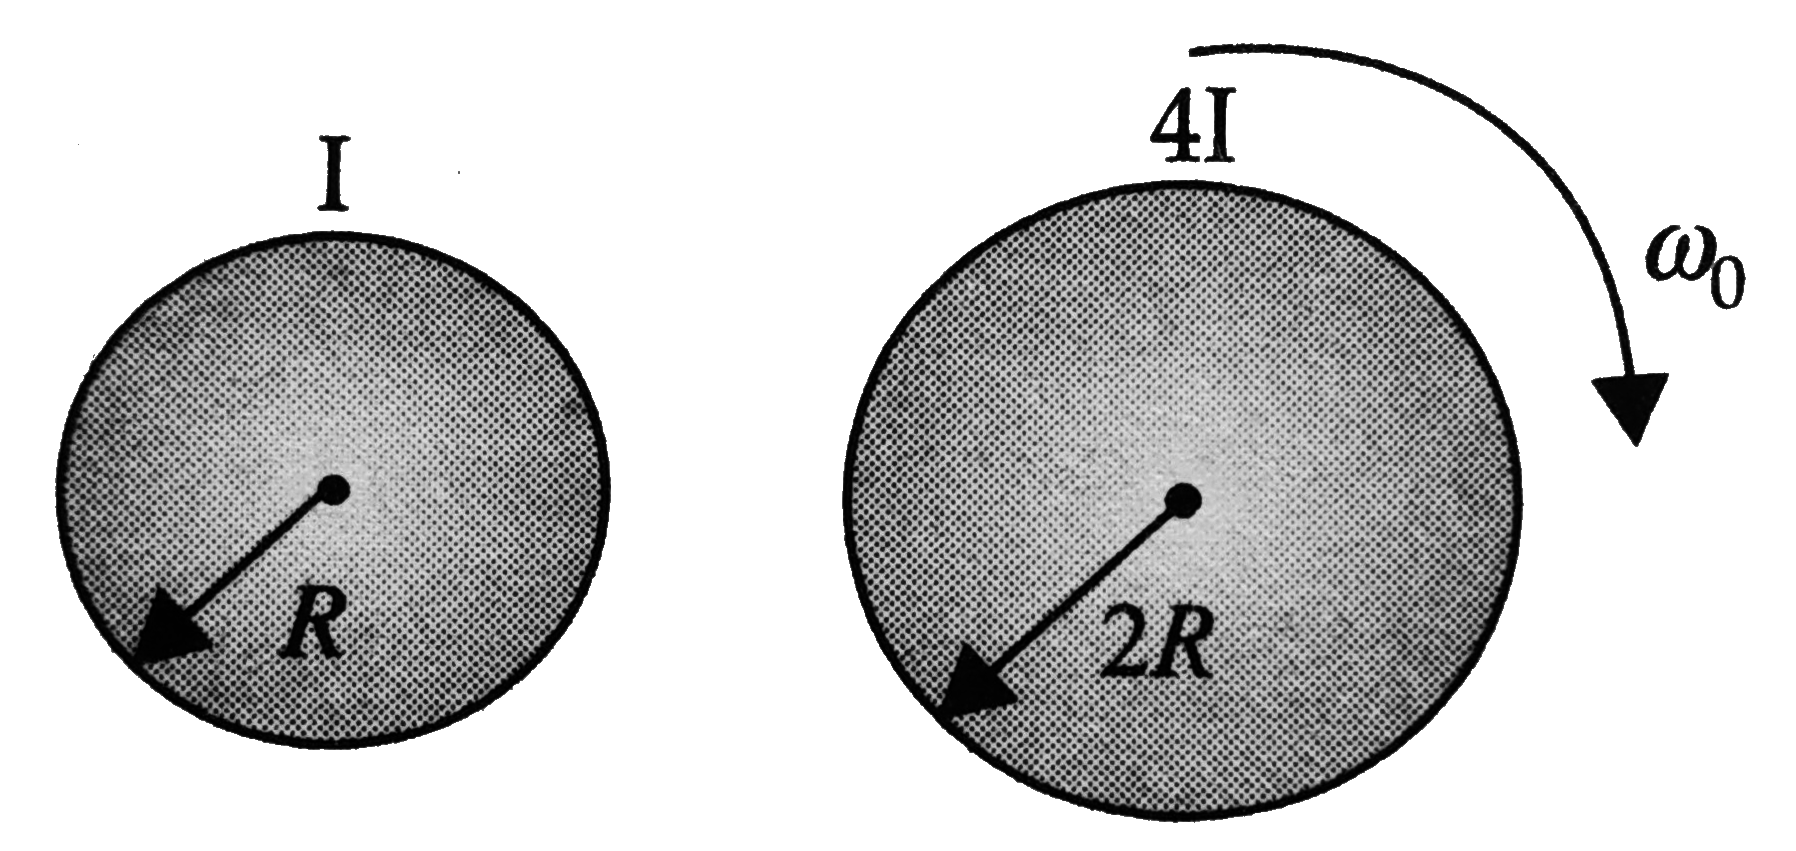 Two cylinders having radii 2R and R and moment of inertia 4I and I about their central axes are supported by axles perpendicular to their planes. The large cylinder is initially rotating clockwise with angular velocity omega(0). The small cylinder is moved to the right until it touches the large cylinder and is caused to rotate by the frictional force between the two. Eventually slipping ceases and the two cylinders rotate at constant rates in opposite directions. During this     (A) angular momentum of system is conserved    (B) kinetic energy is conserved   (C neither the angular momentum nor the kinetic energy is conserved    (D) both the angular momentum and kinetic energy are conserved